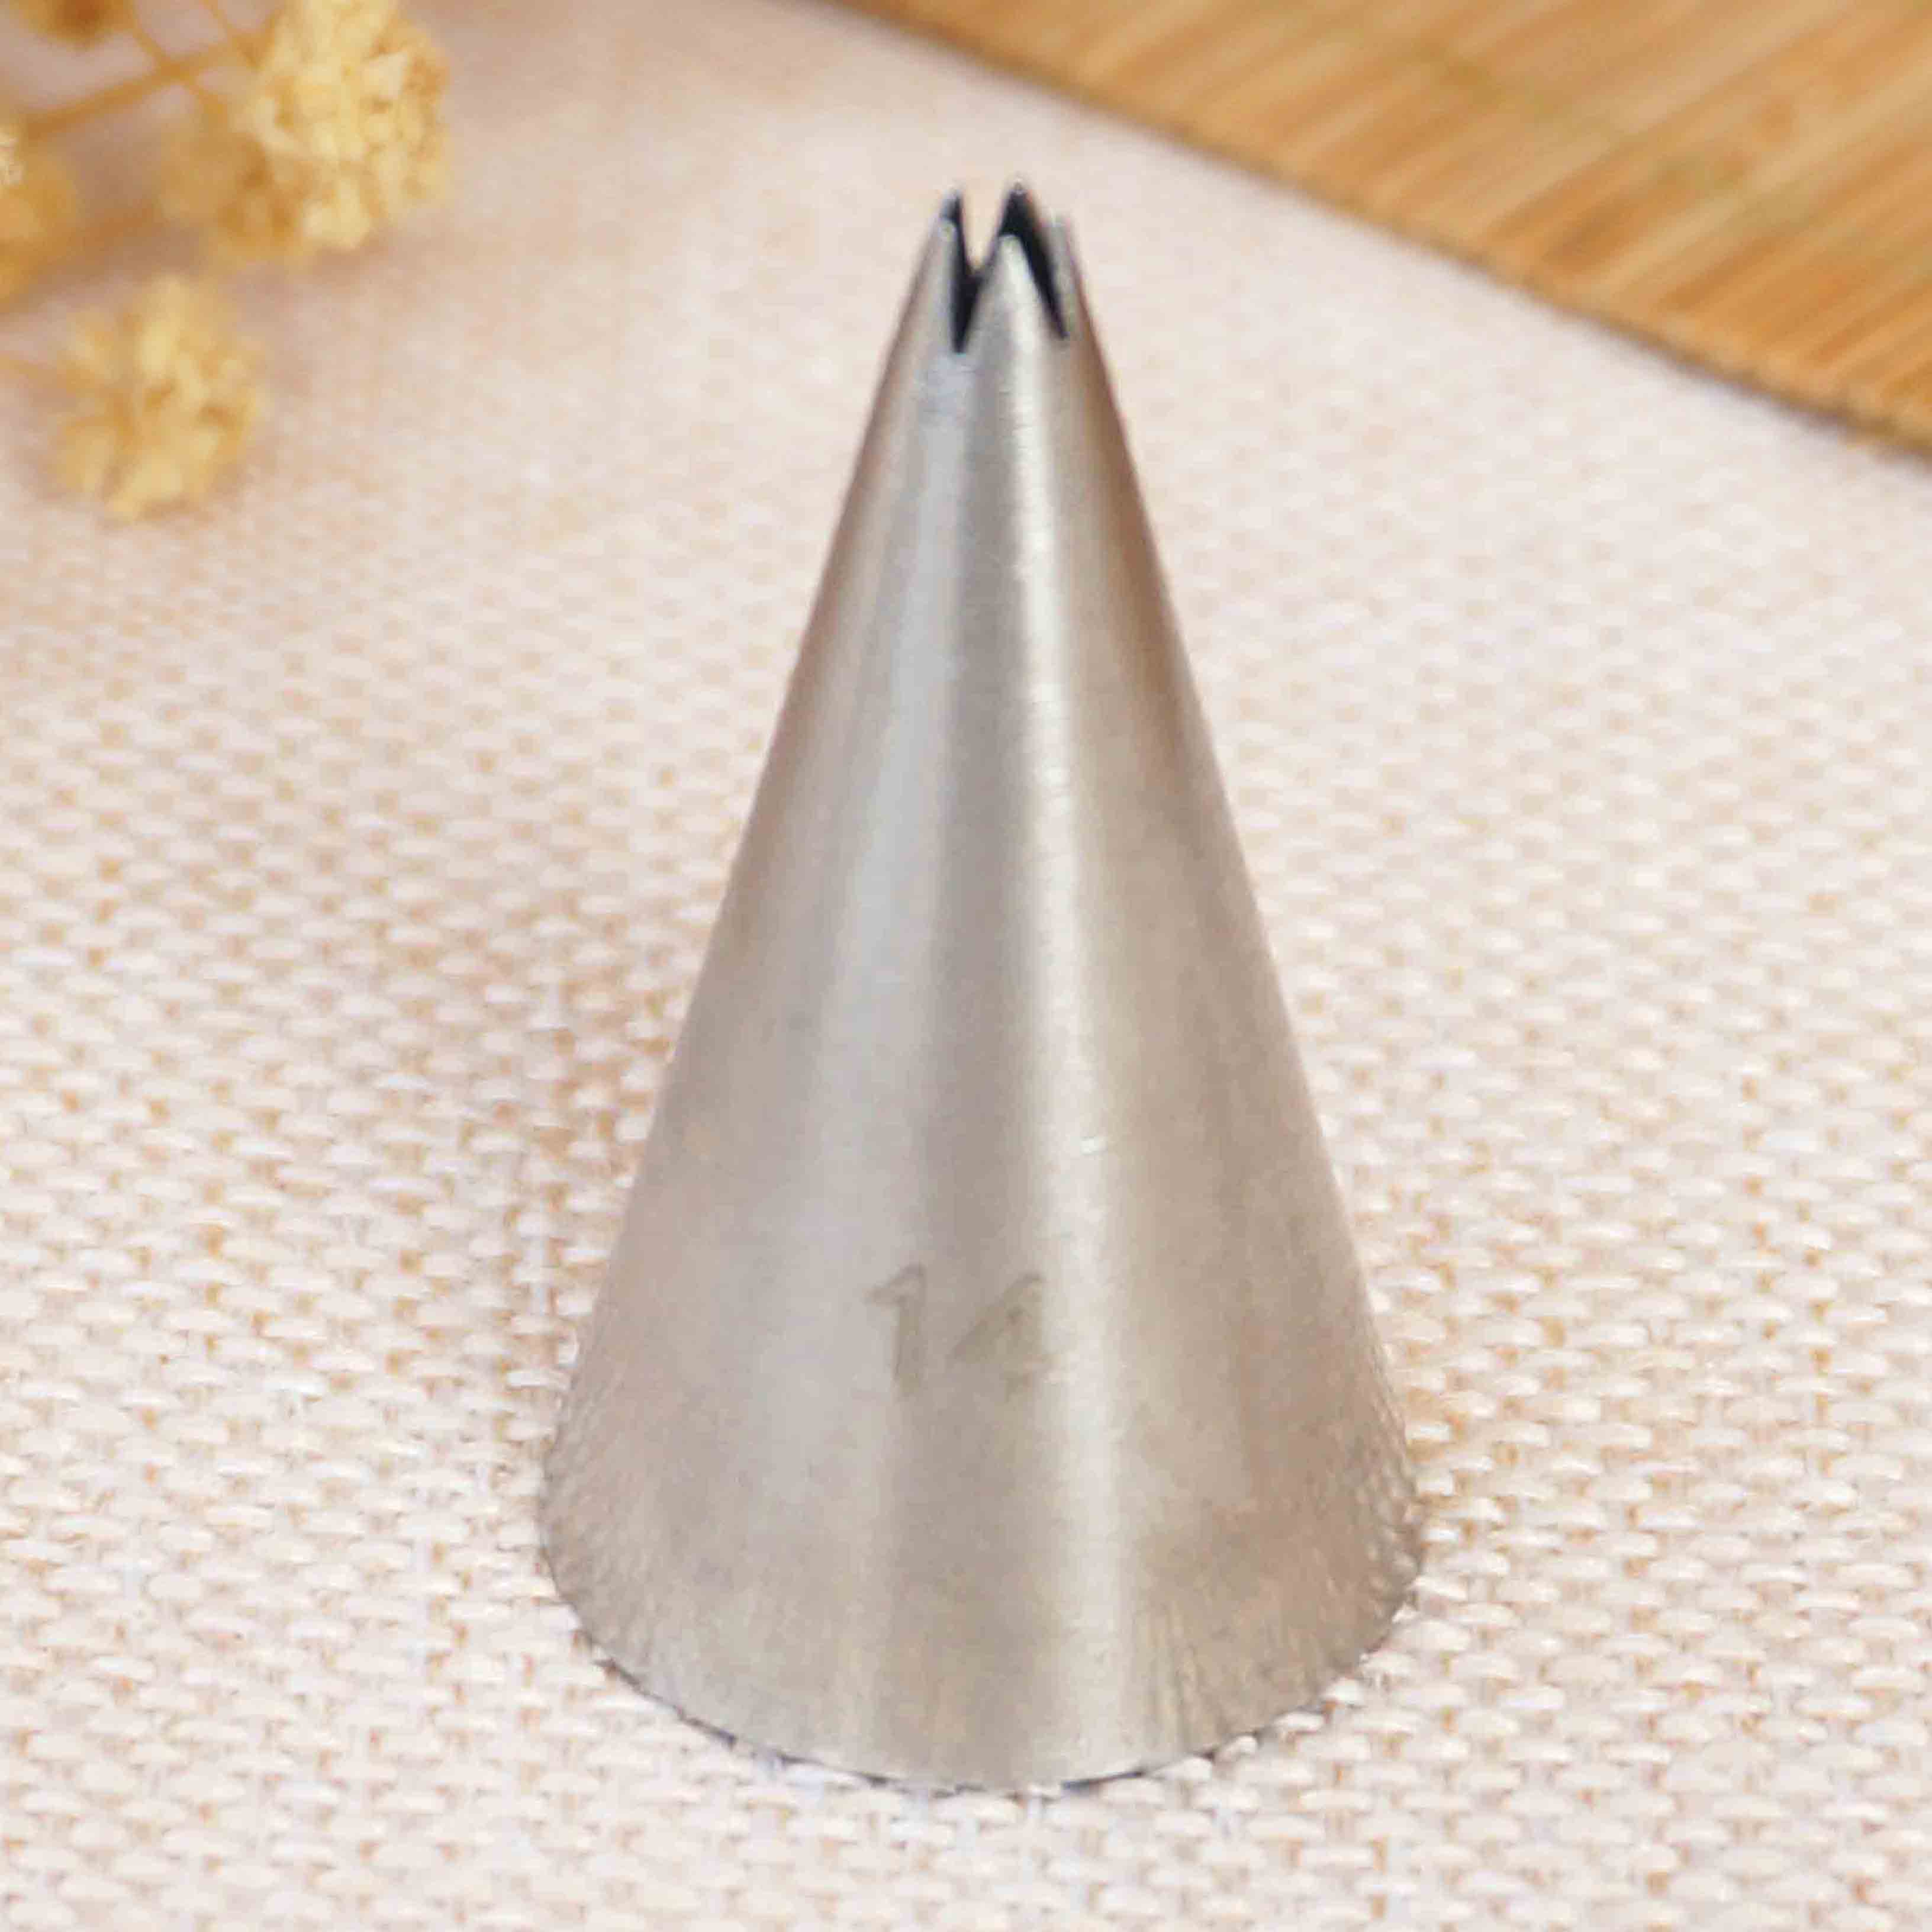 #14 kleine Size Open Ster Icing Nozzle Piping Tip Cake Decorating Tips Royal Icing Pastry Tip Gereedschap Bakvormen Roestvrij staal